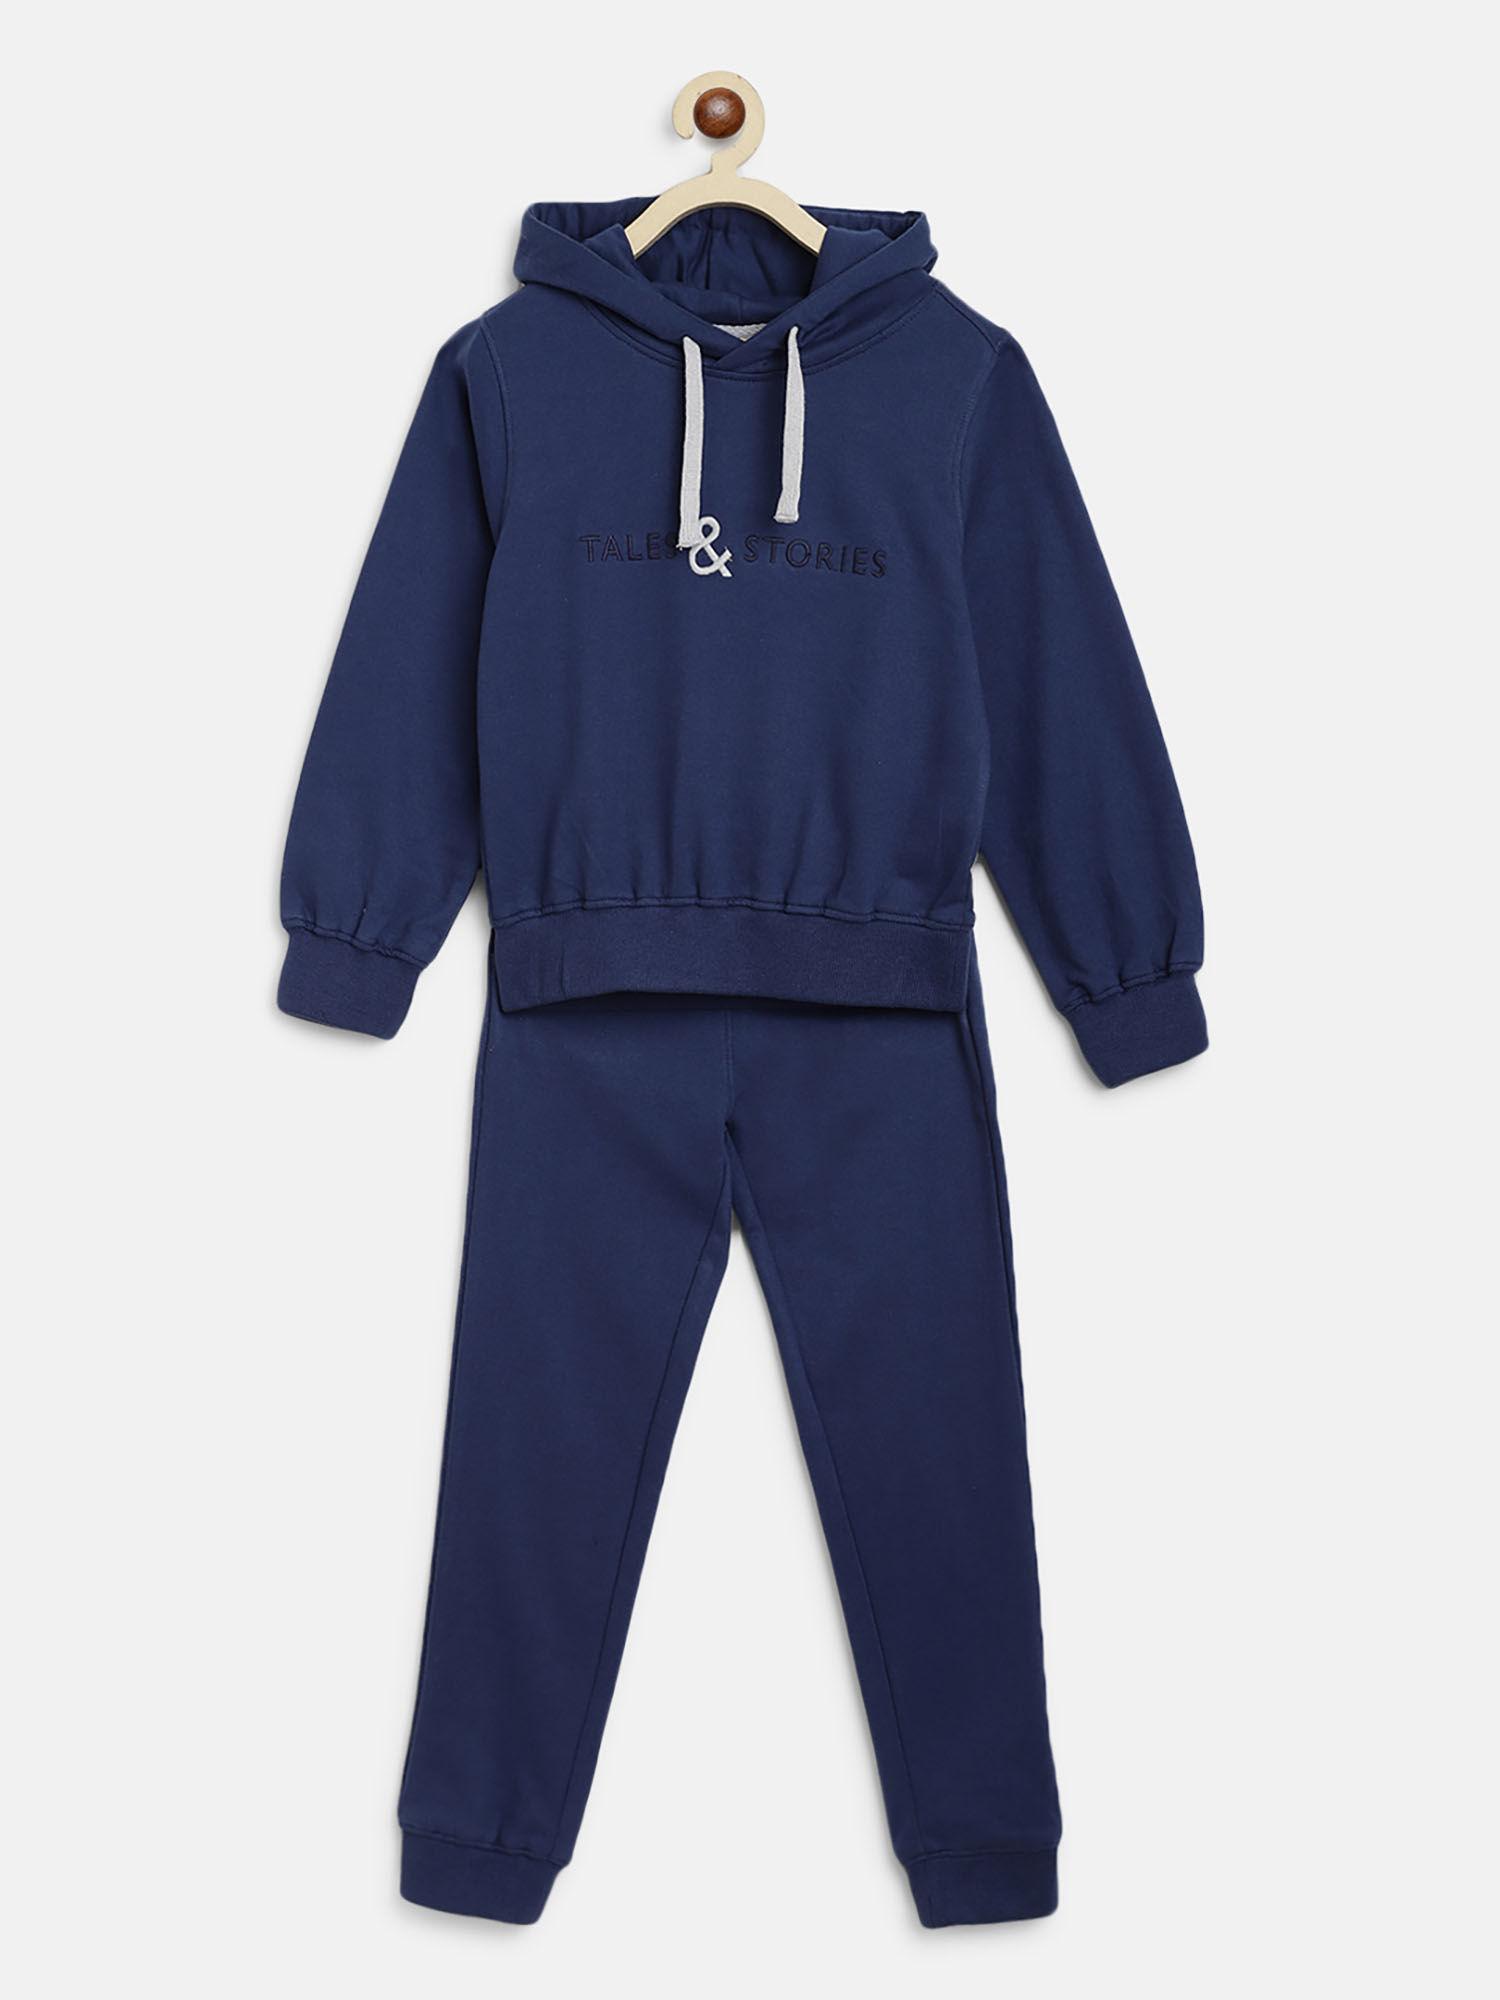 solid navy blue poly cotton sweatshirt & joggers (set of 2)